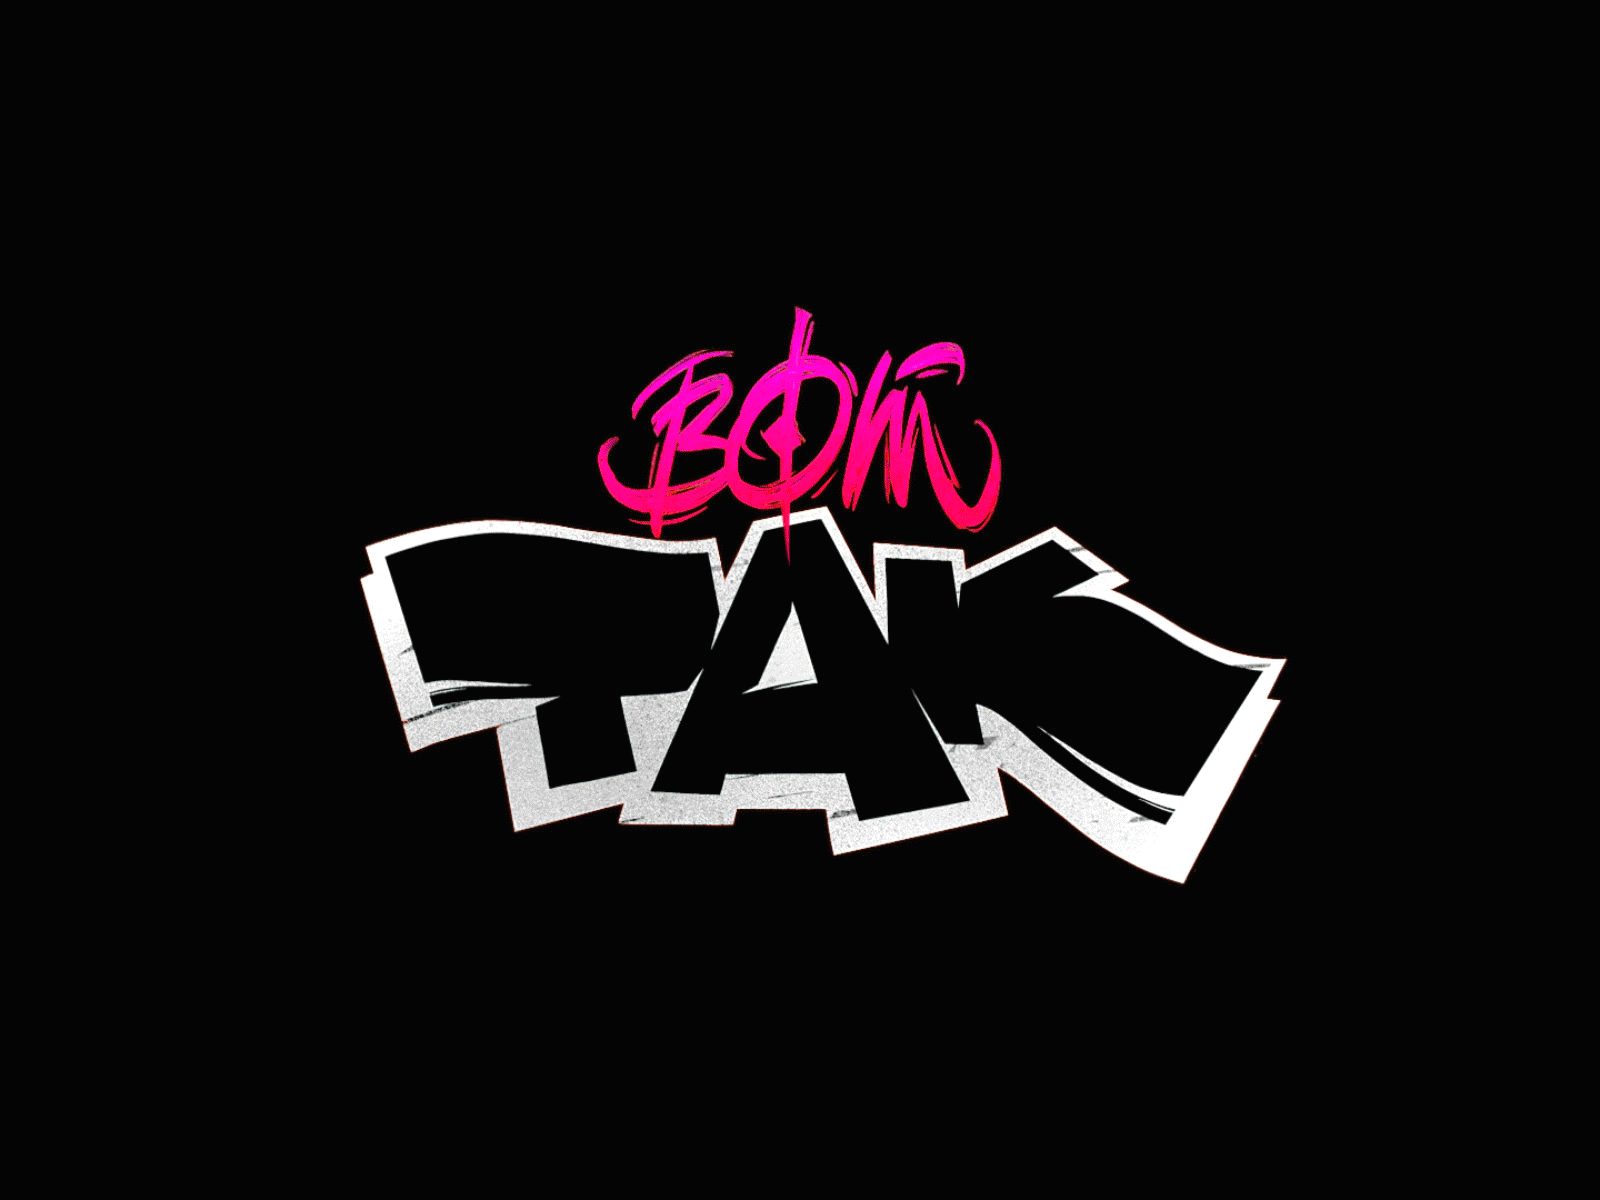 Вот так -Lettering after effects brush brush lettering burn burning burst calligraphy dynamic fast fire lettering letteringlogo liquid logo logoanimation particles sparks text animation